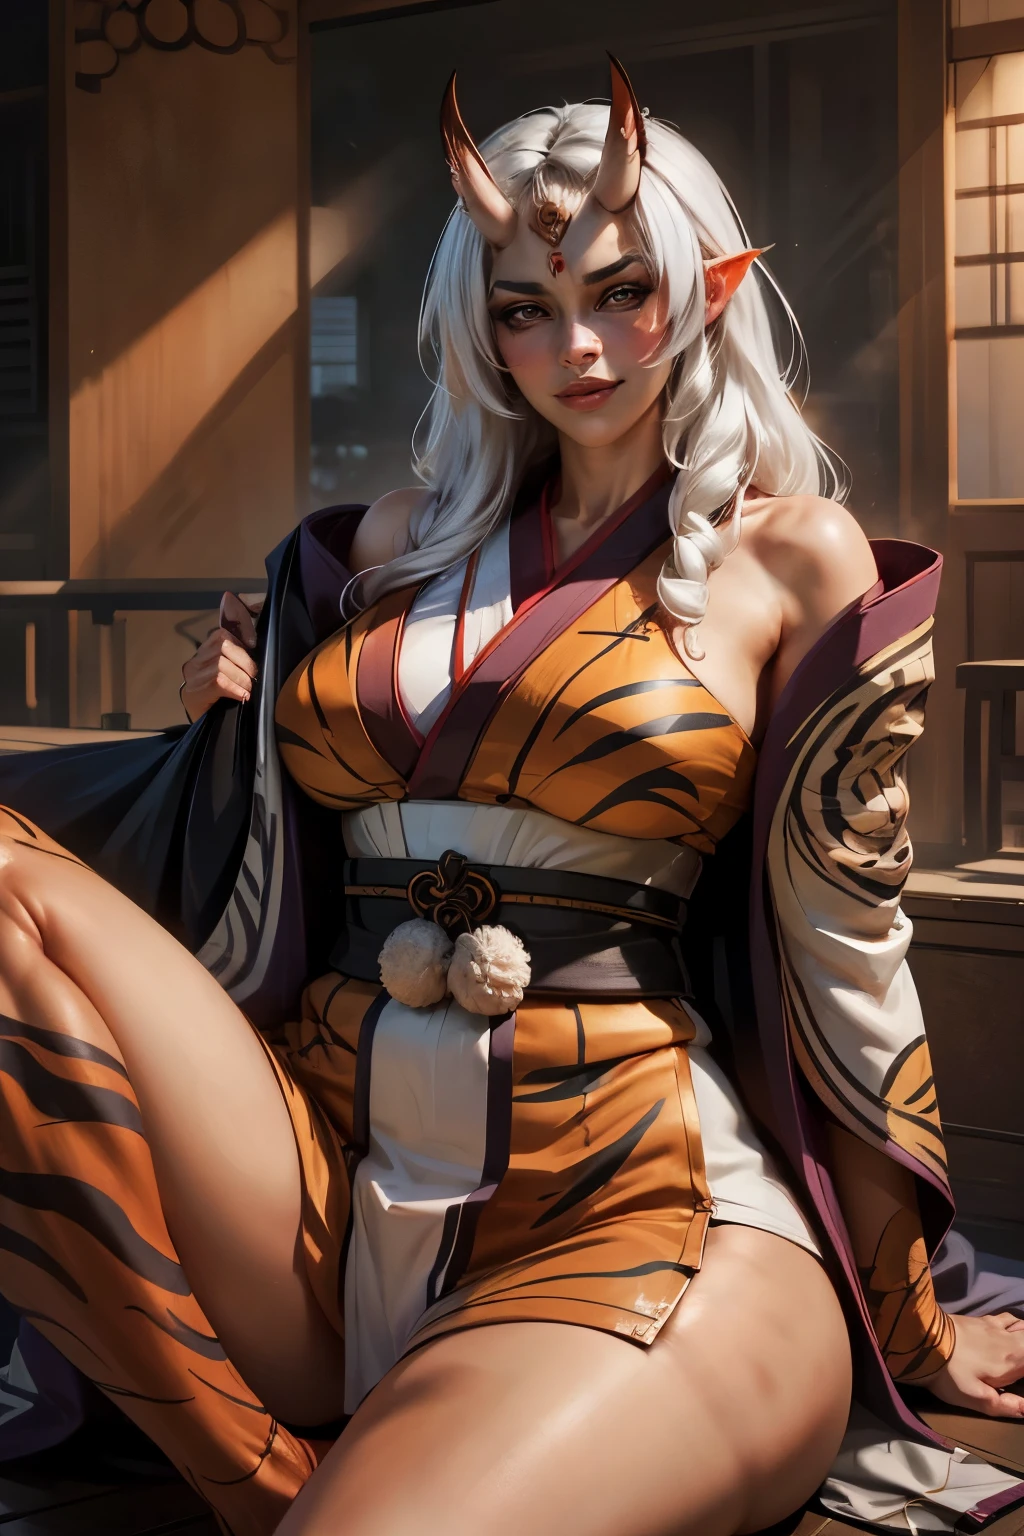 (beautiful) Asian (((Oni female))) warrior, sitting with legs spread, wearing (Tiger print short kimono), with ((thick curvy mature body)) yet ((muscular)), long and voluminous white hair blown by the wind, (2 long anime_Oni_horns ), reddish fair skin , (perfect detailed face features) expressive eyes with proud look , thick lips letting a provocative grin,
